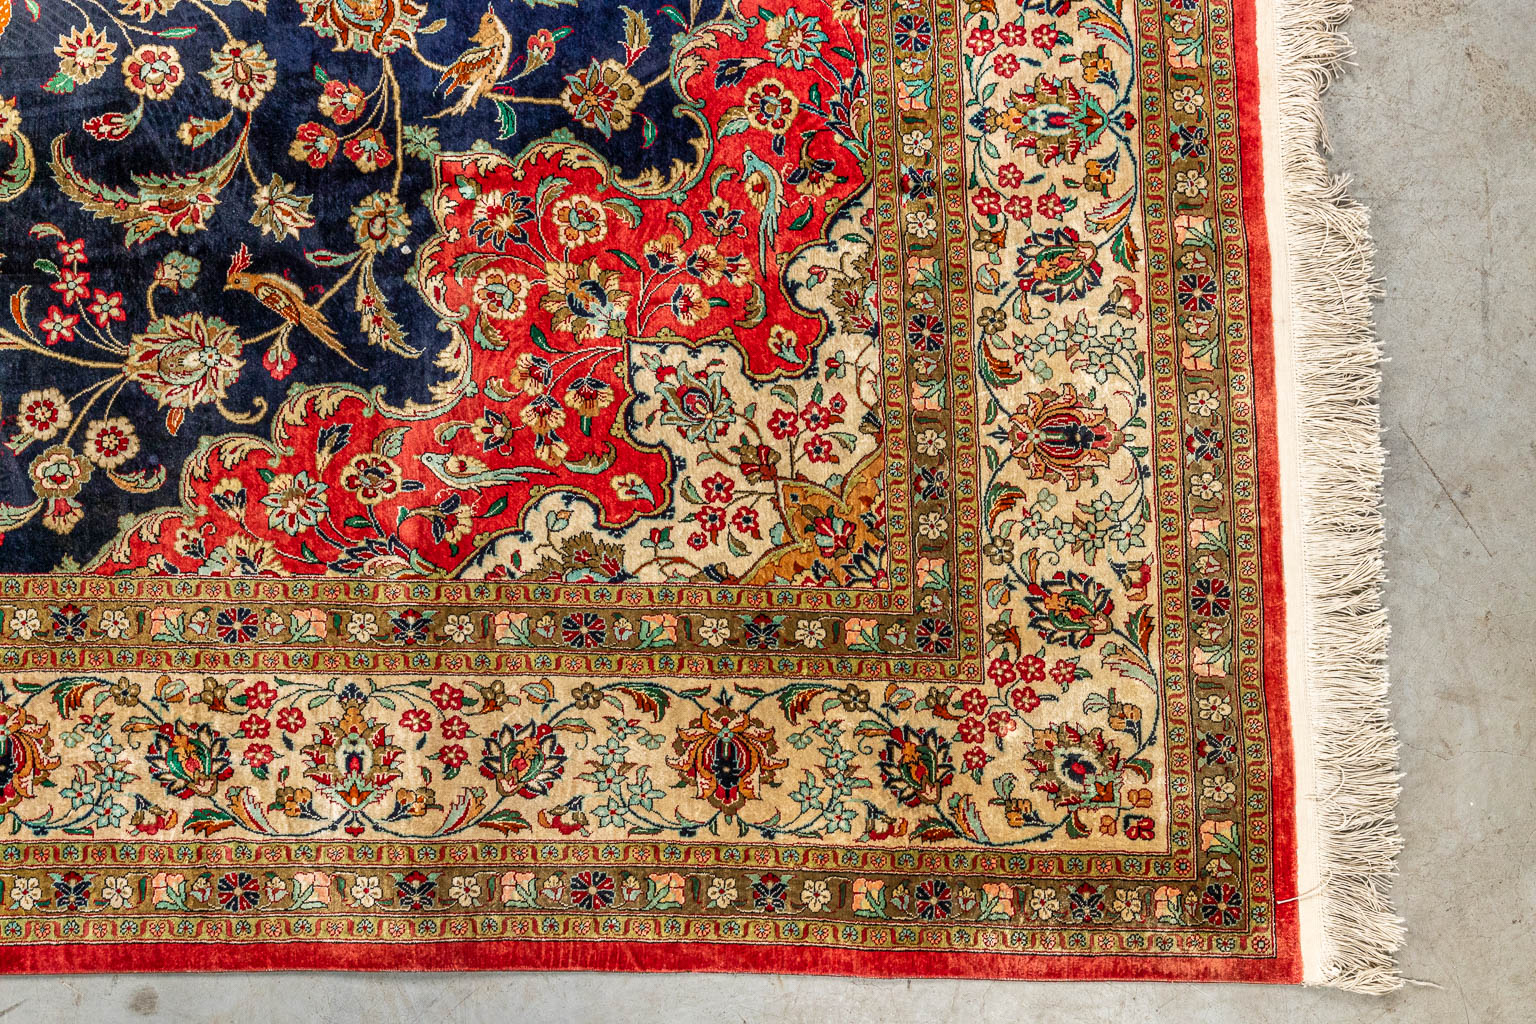 An Oriental hand-made carpet made of silk, decorated with birds and flowers. Keshan. (200 x 310 cm)